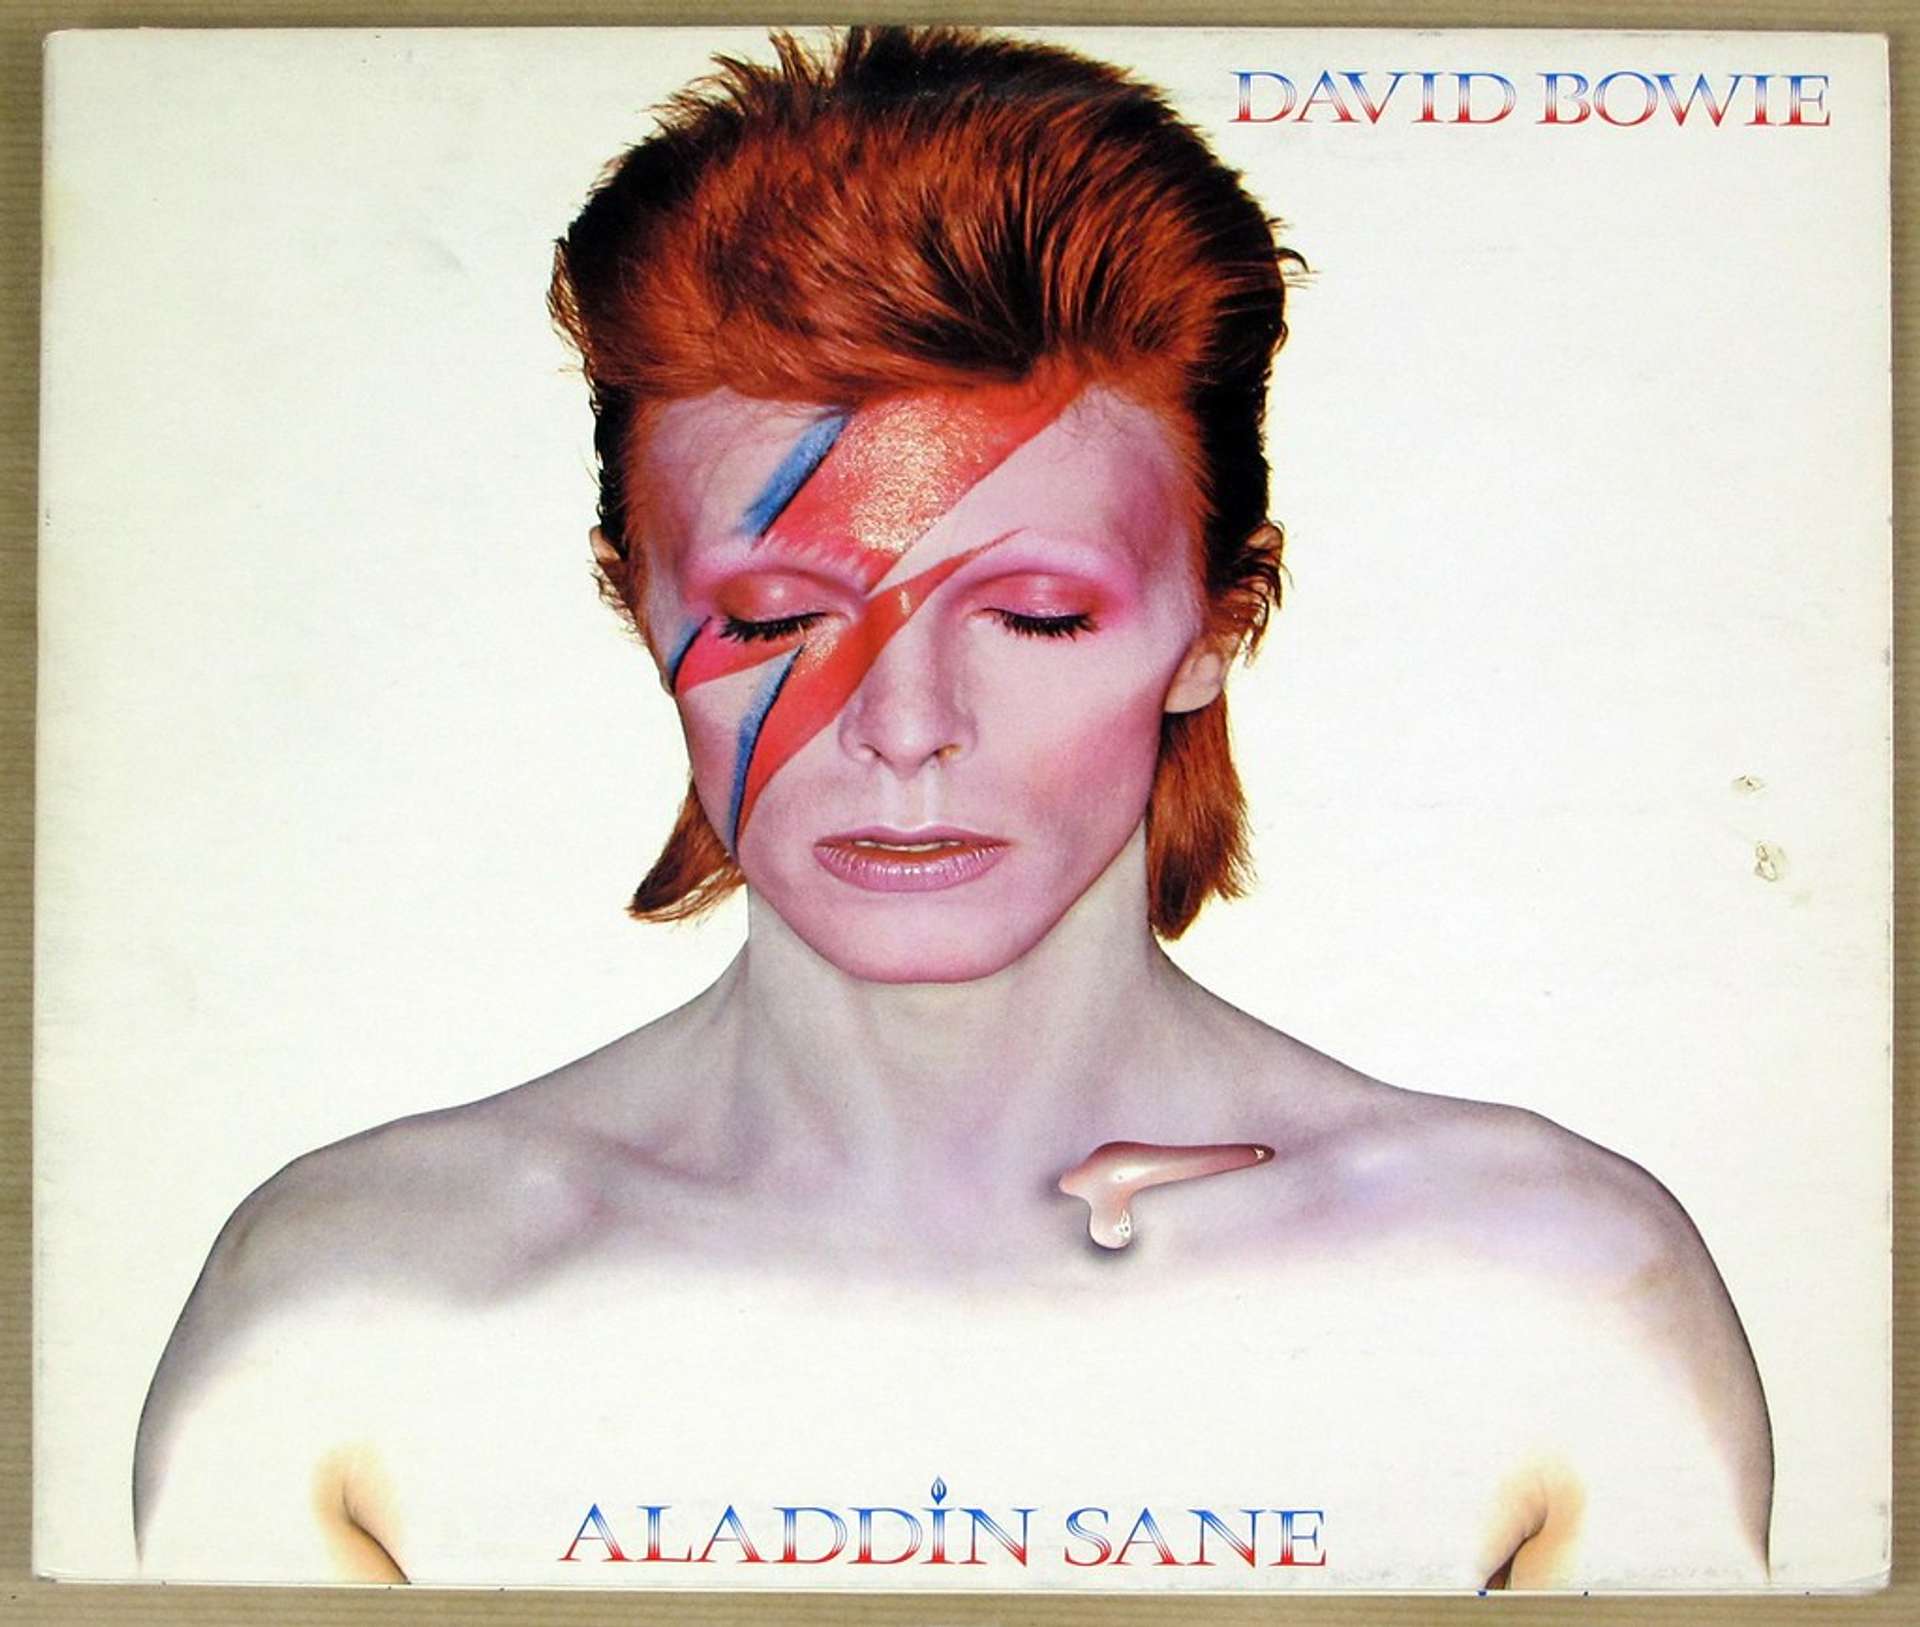 An image of Bowie on the cover of Aladdin Sane in his characteristic makeup, featuring a lightning bolt across his face.